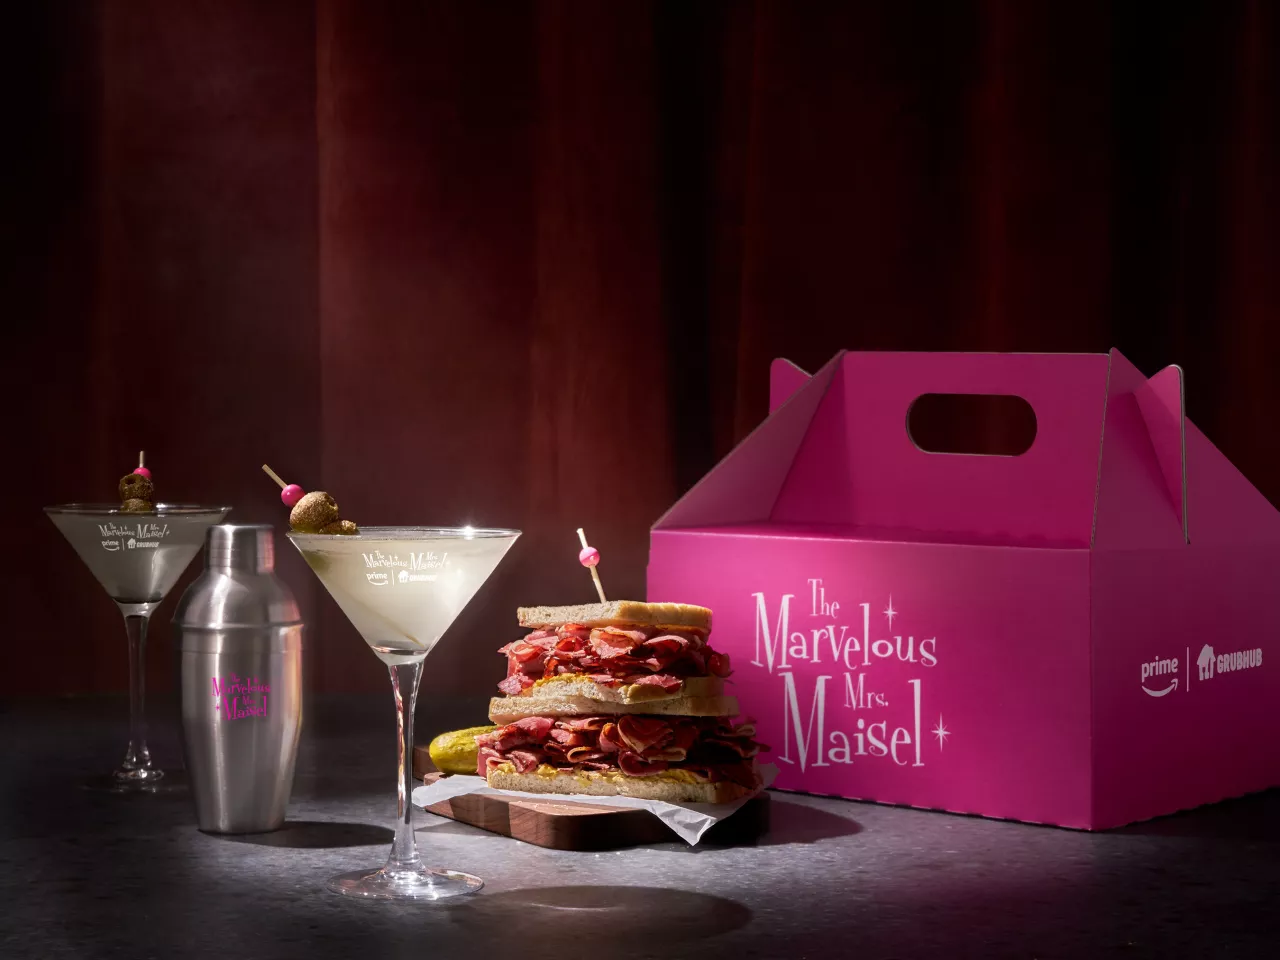 Grubhub Created a Pastrami-Inspired Martini So Diners Can Toast to the Series Finale of The Marvelous Mrs. Maisel on Prime Video